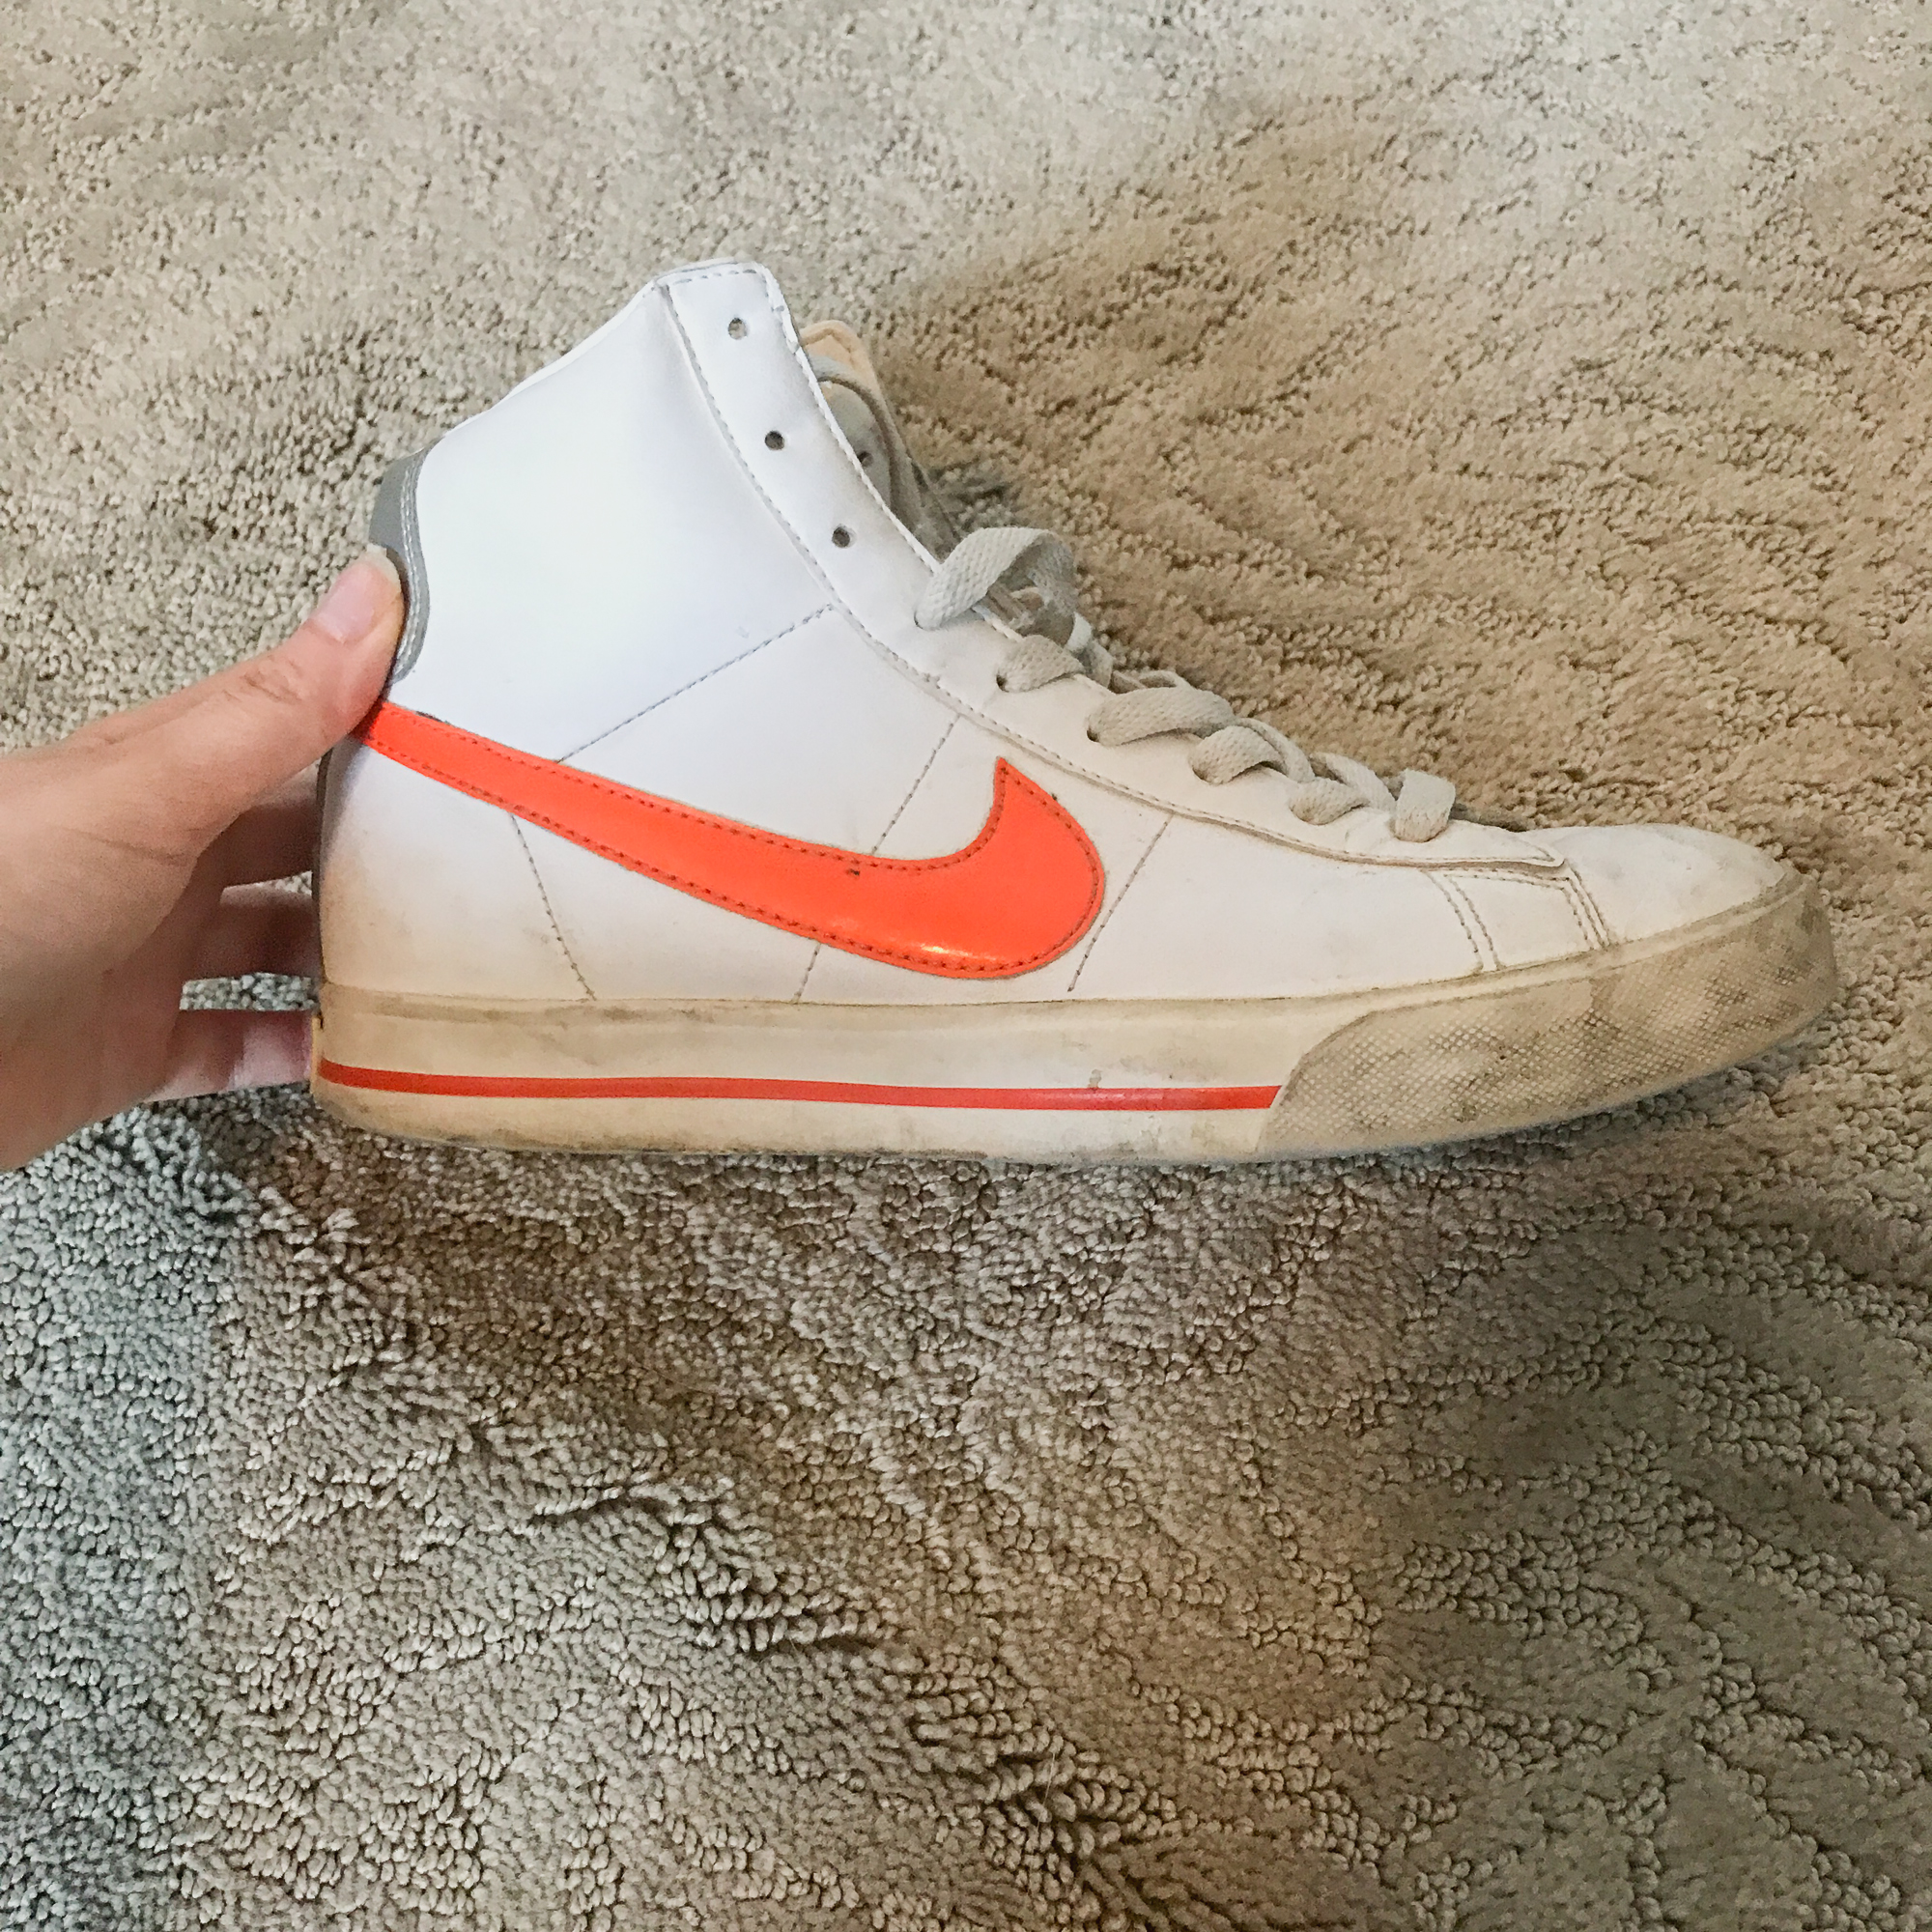 Revamp Nike Shoes | Painting DIY — From Coast to Coast